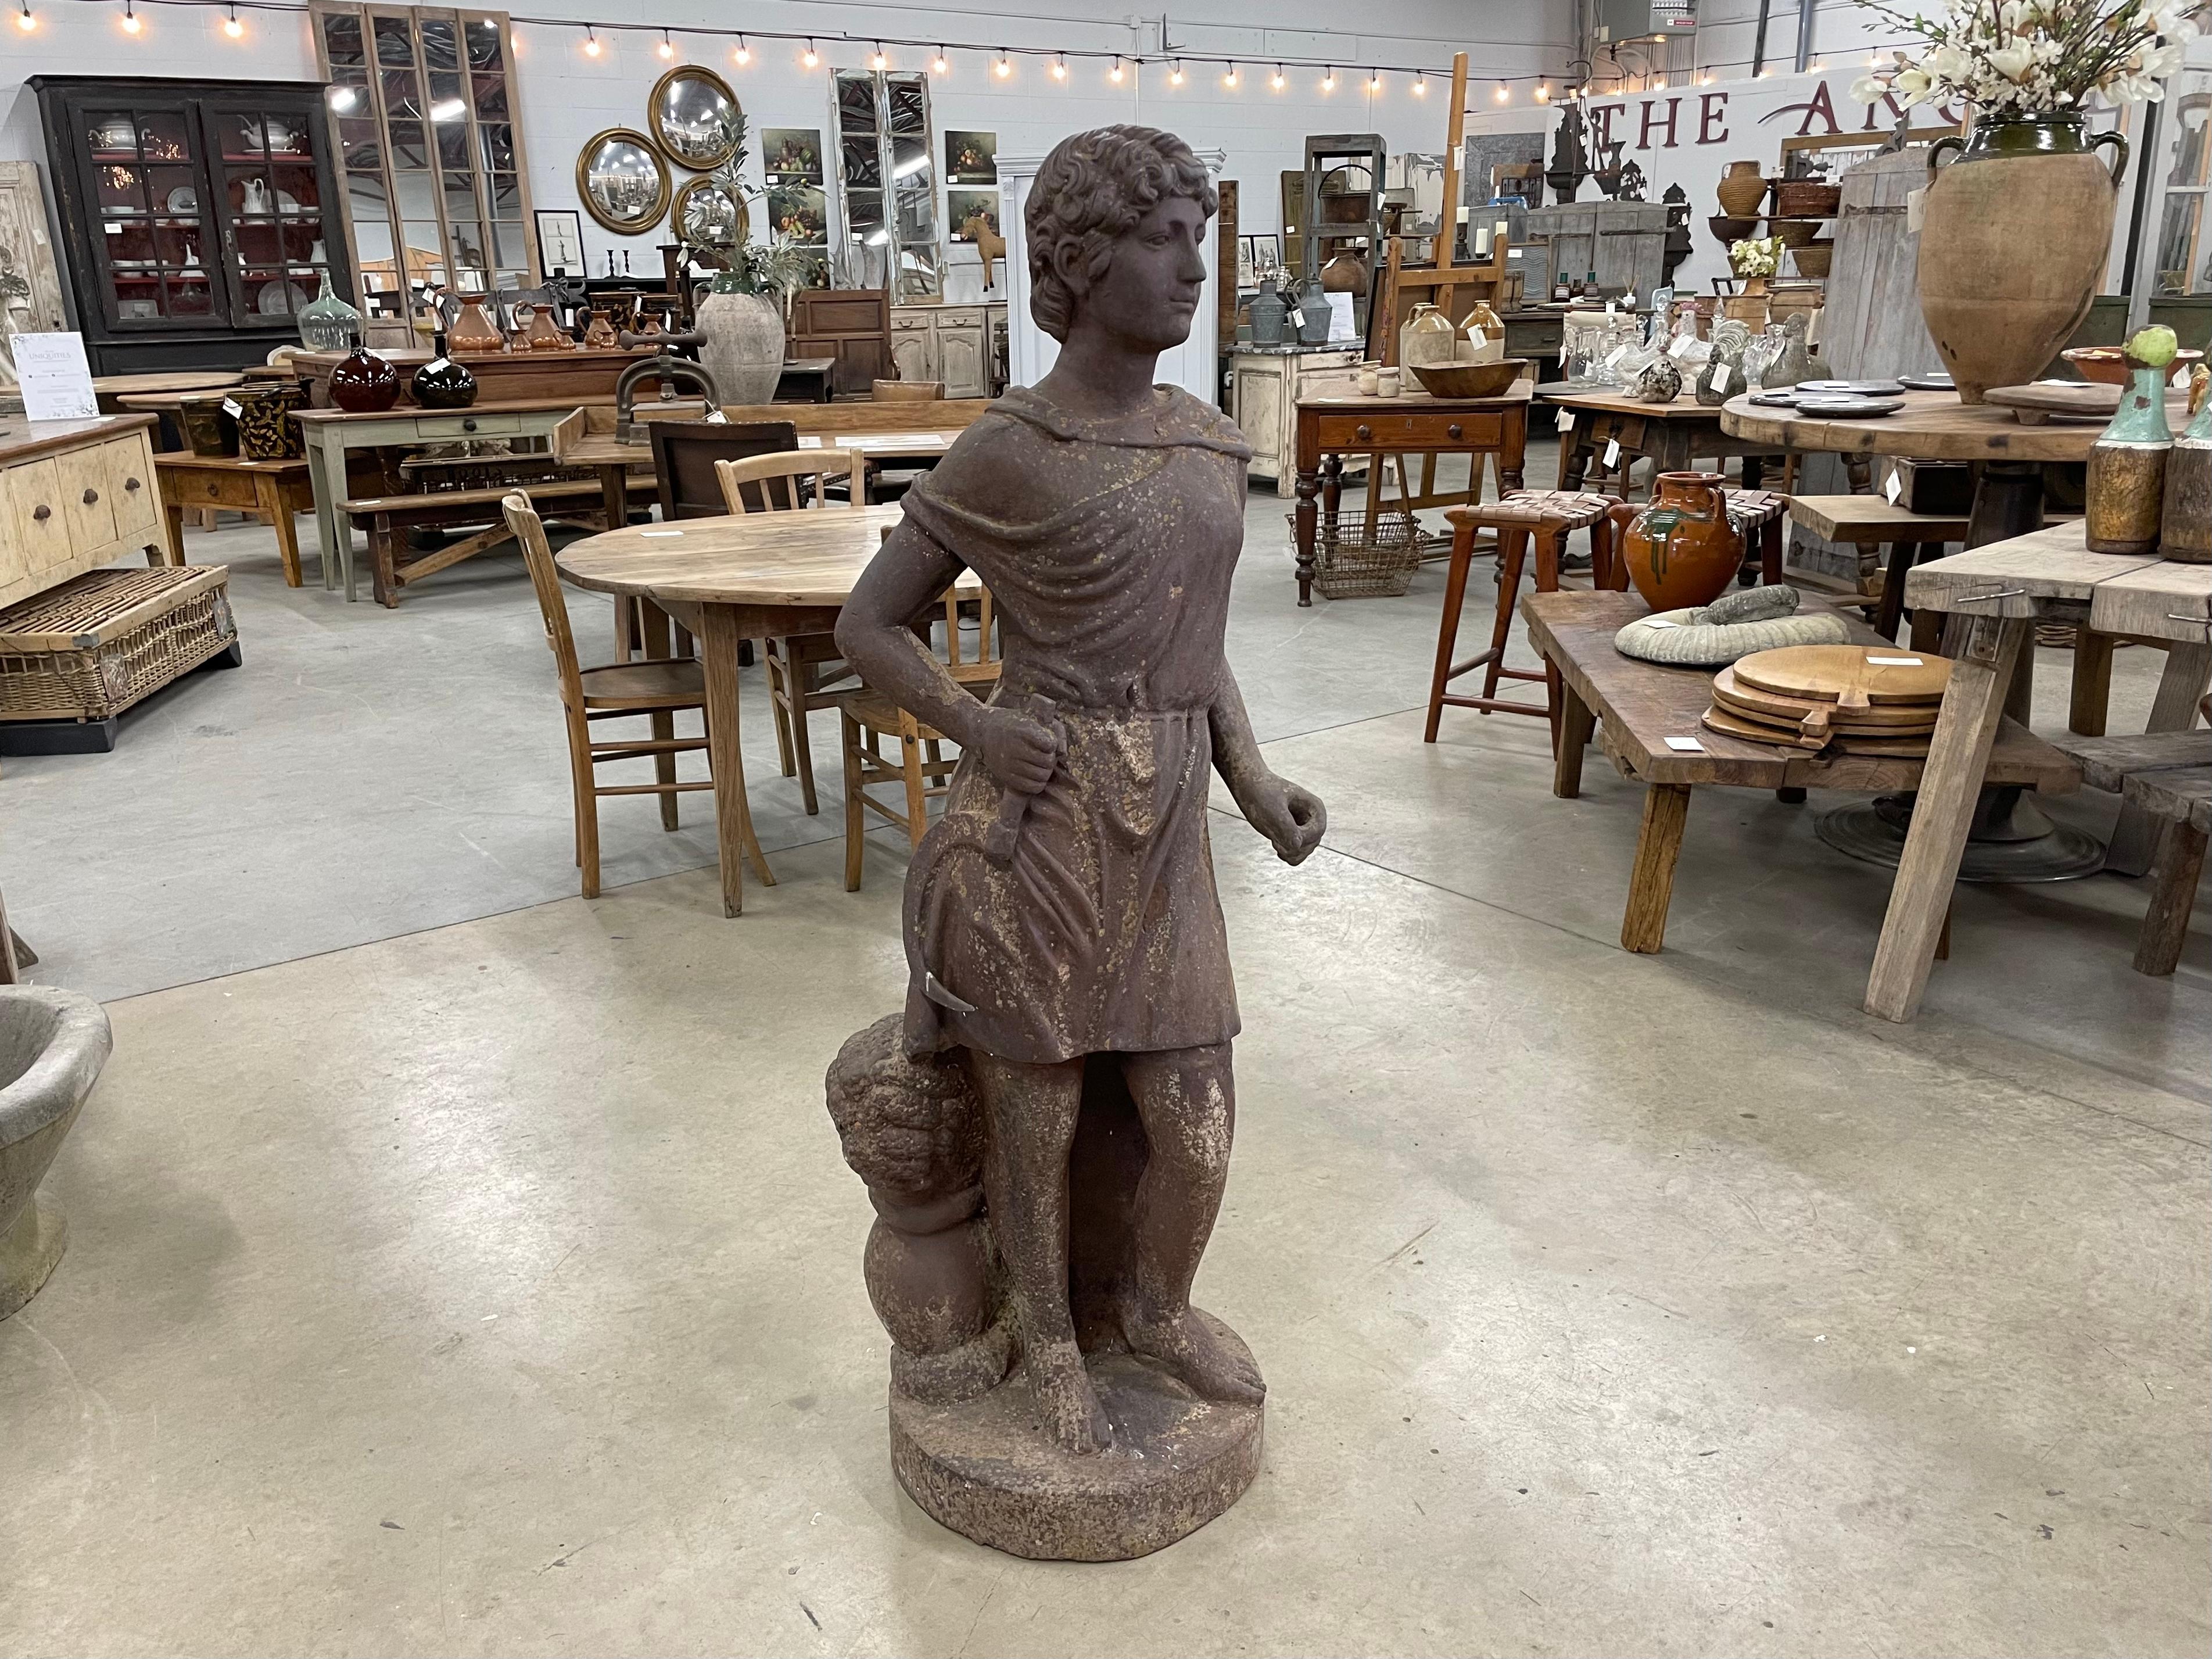 Beautiful and substantial antique cast iron statue of Demeter, the Olympian goddess of agriculture, grain and bread. She presided not only over crops and grains but also fertility of the earth and the path to a blessed afterlife.

Her demeanor is